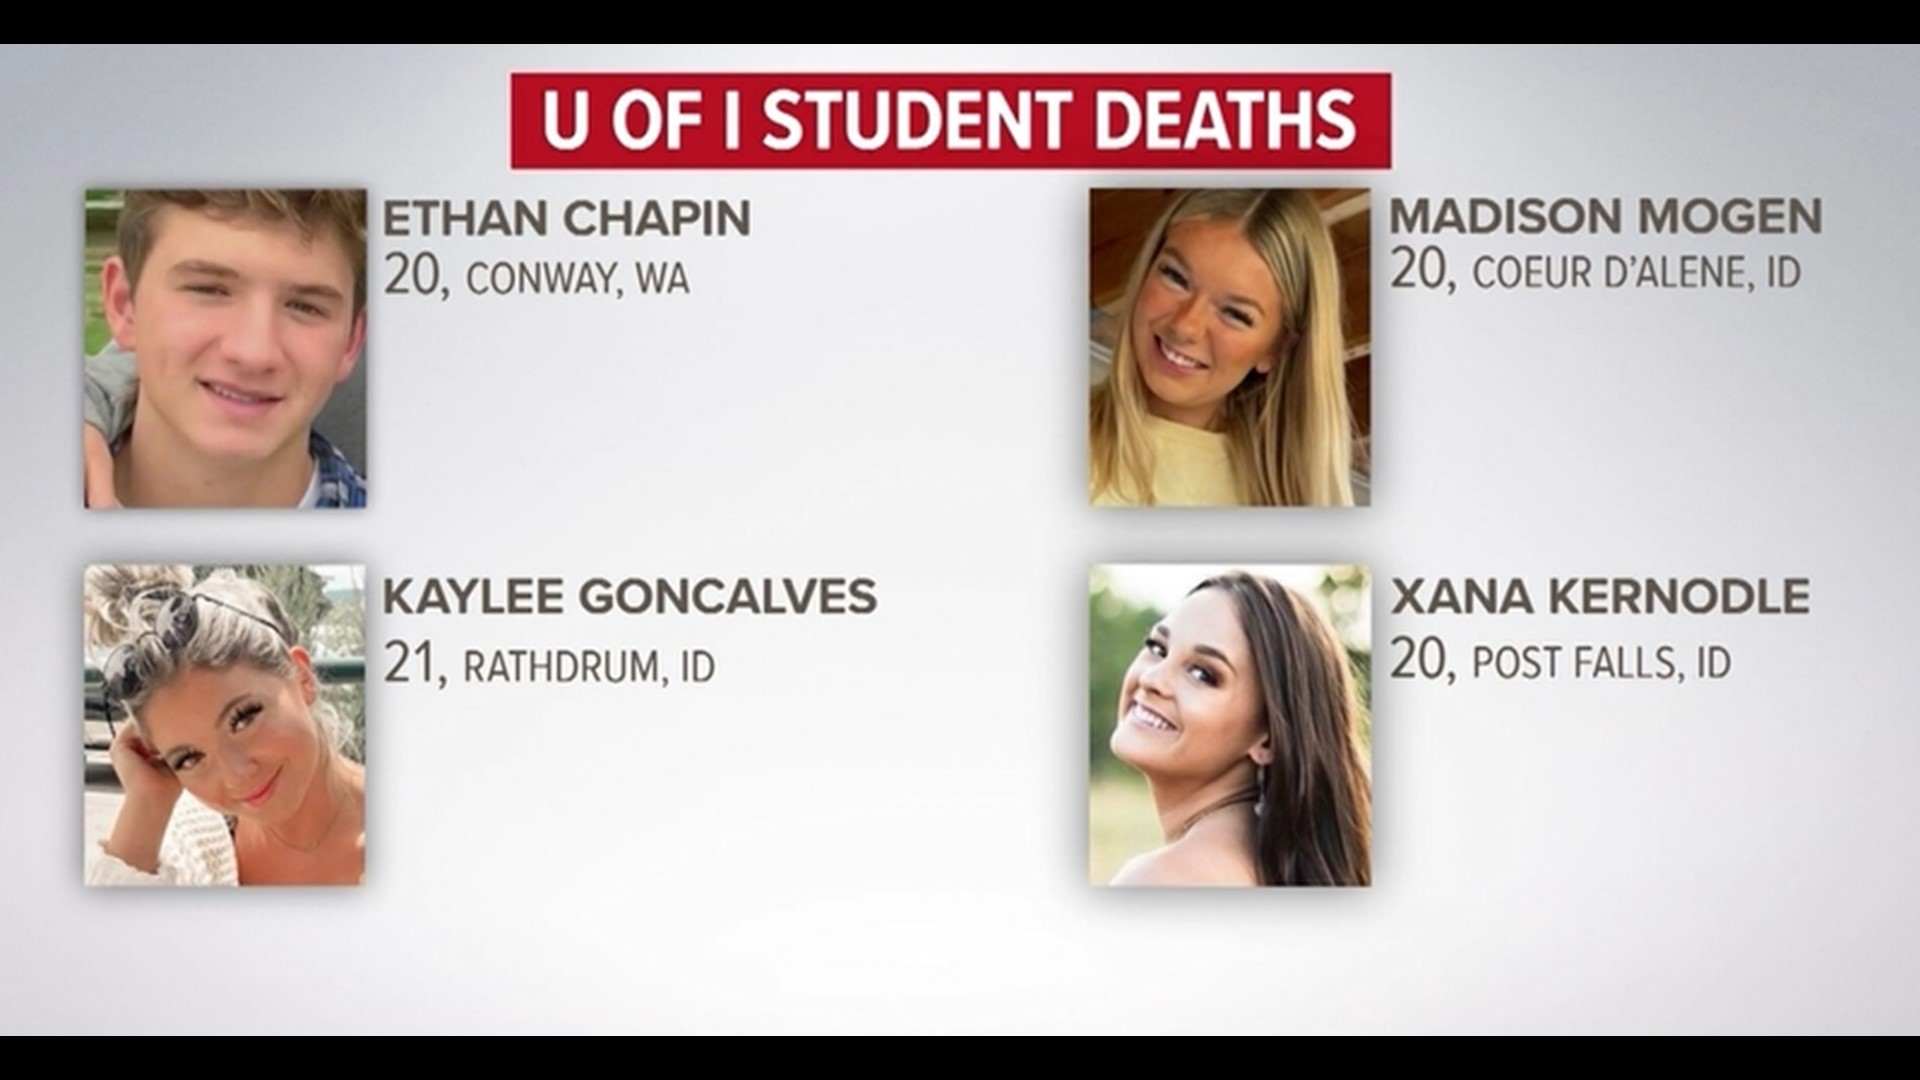 In the News Now takes a look at the suspect in the murders of four college students in Idaho.